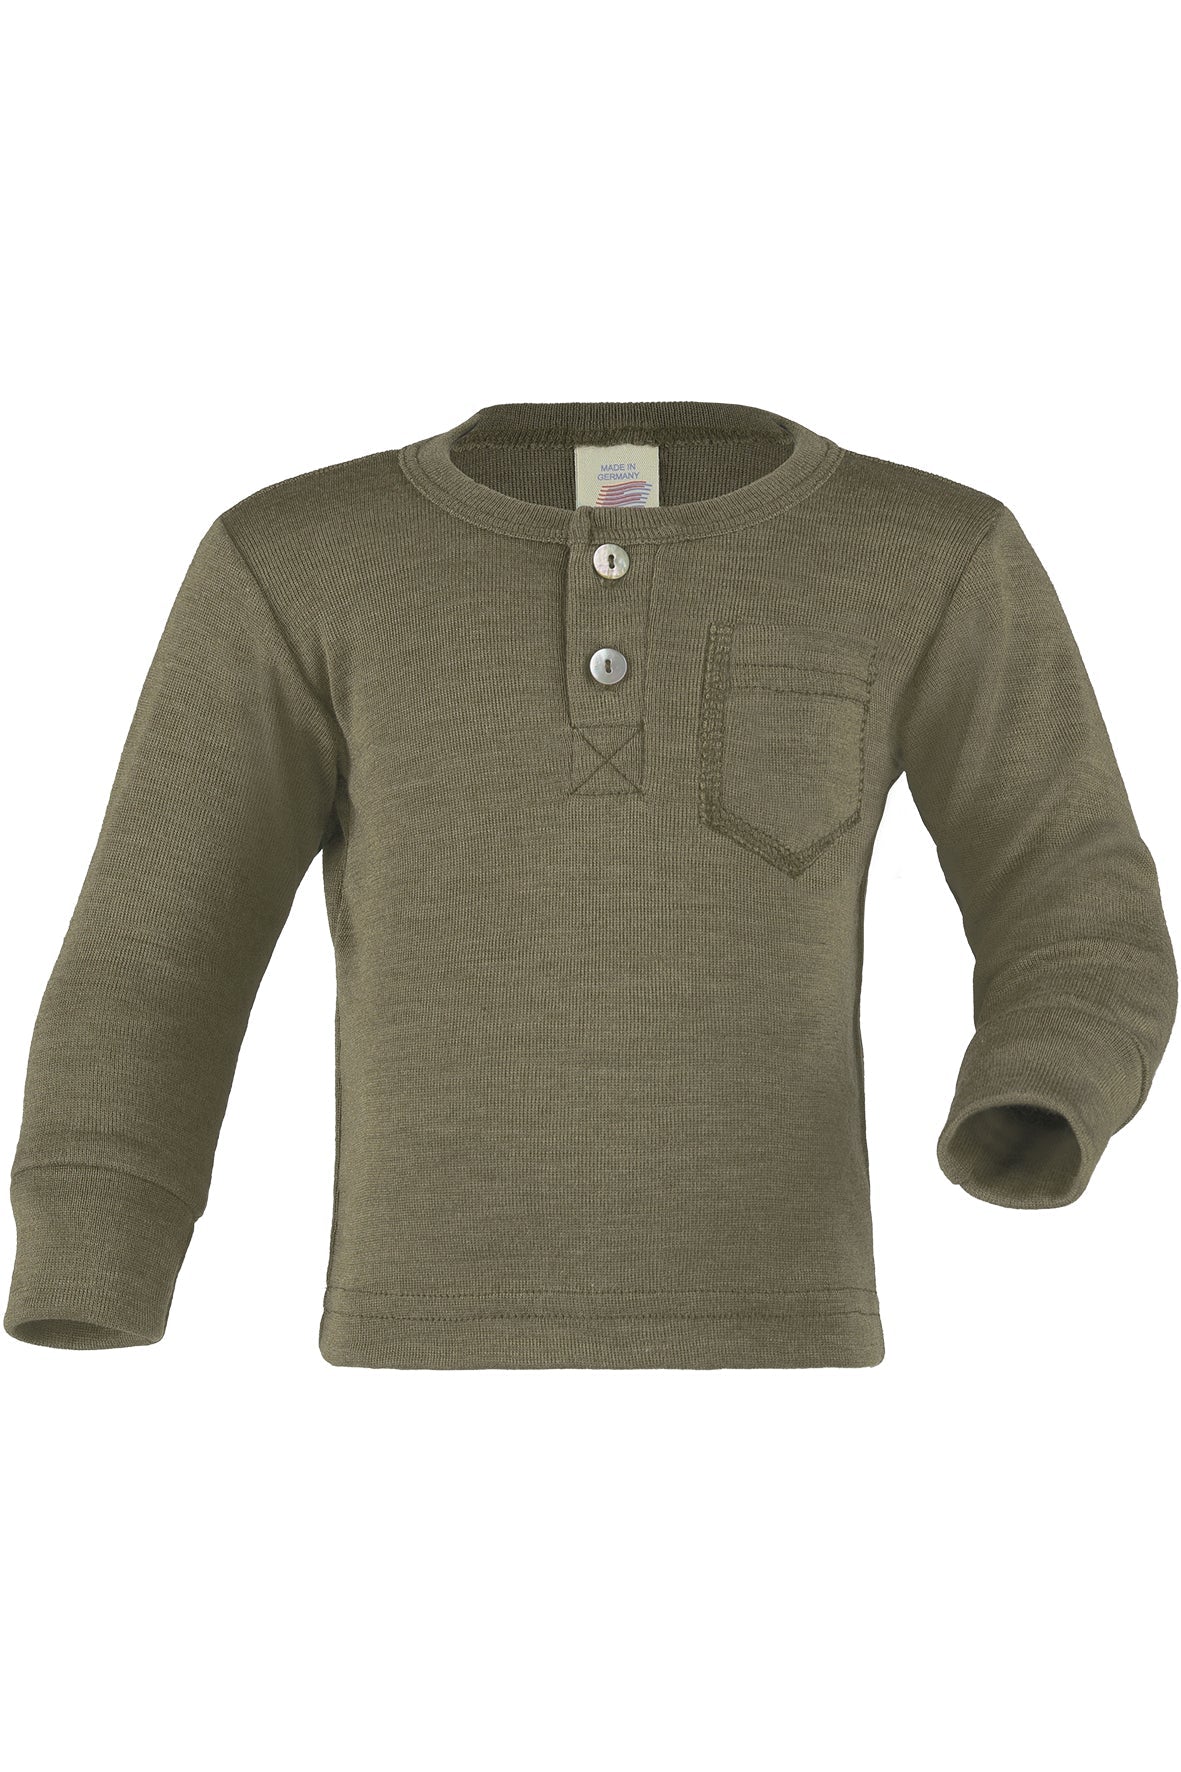 Engel Baby Shirt with Button Tab - Olive